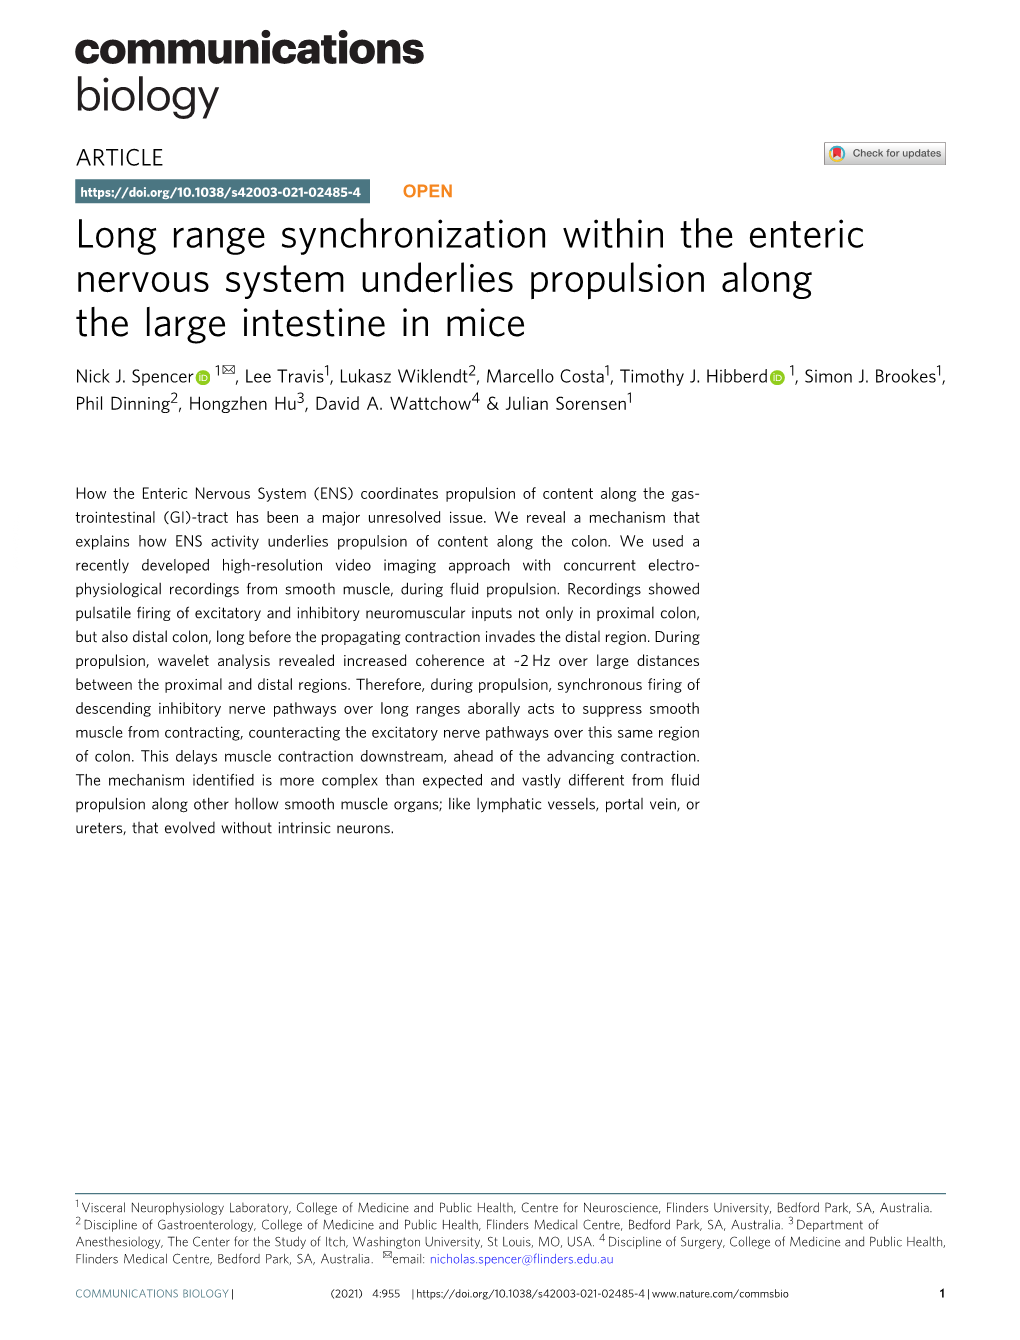 Long Range Synchronization Within the Enteric Nervous System Underlies Propulsion Along the Large Intestine in Mice ✉ Nick J